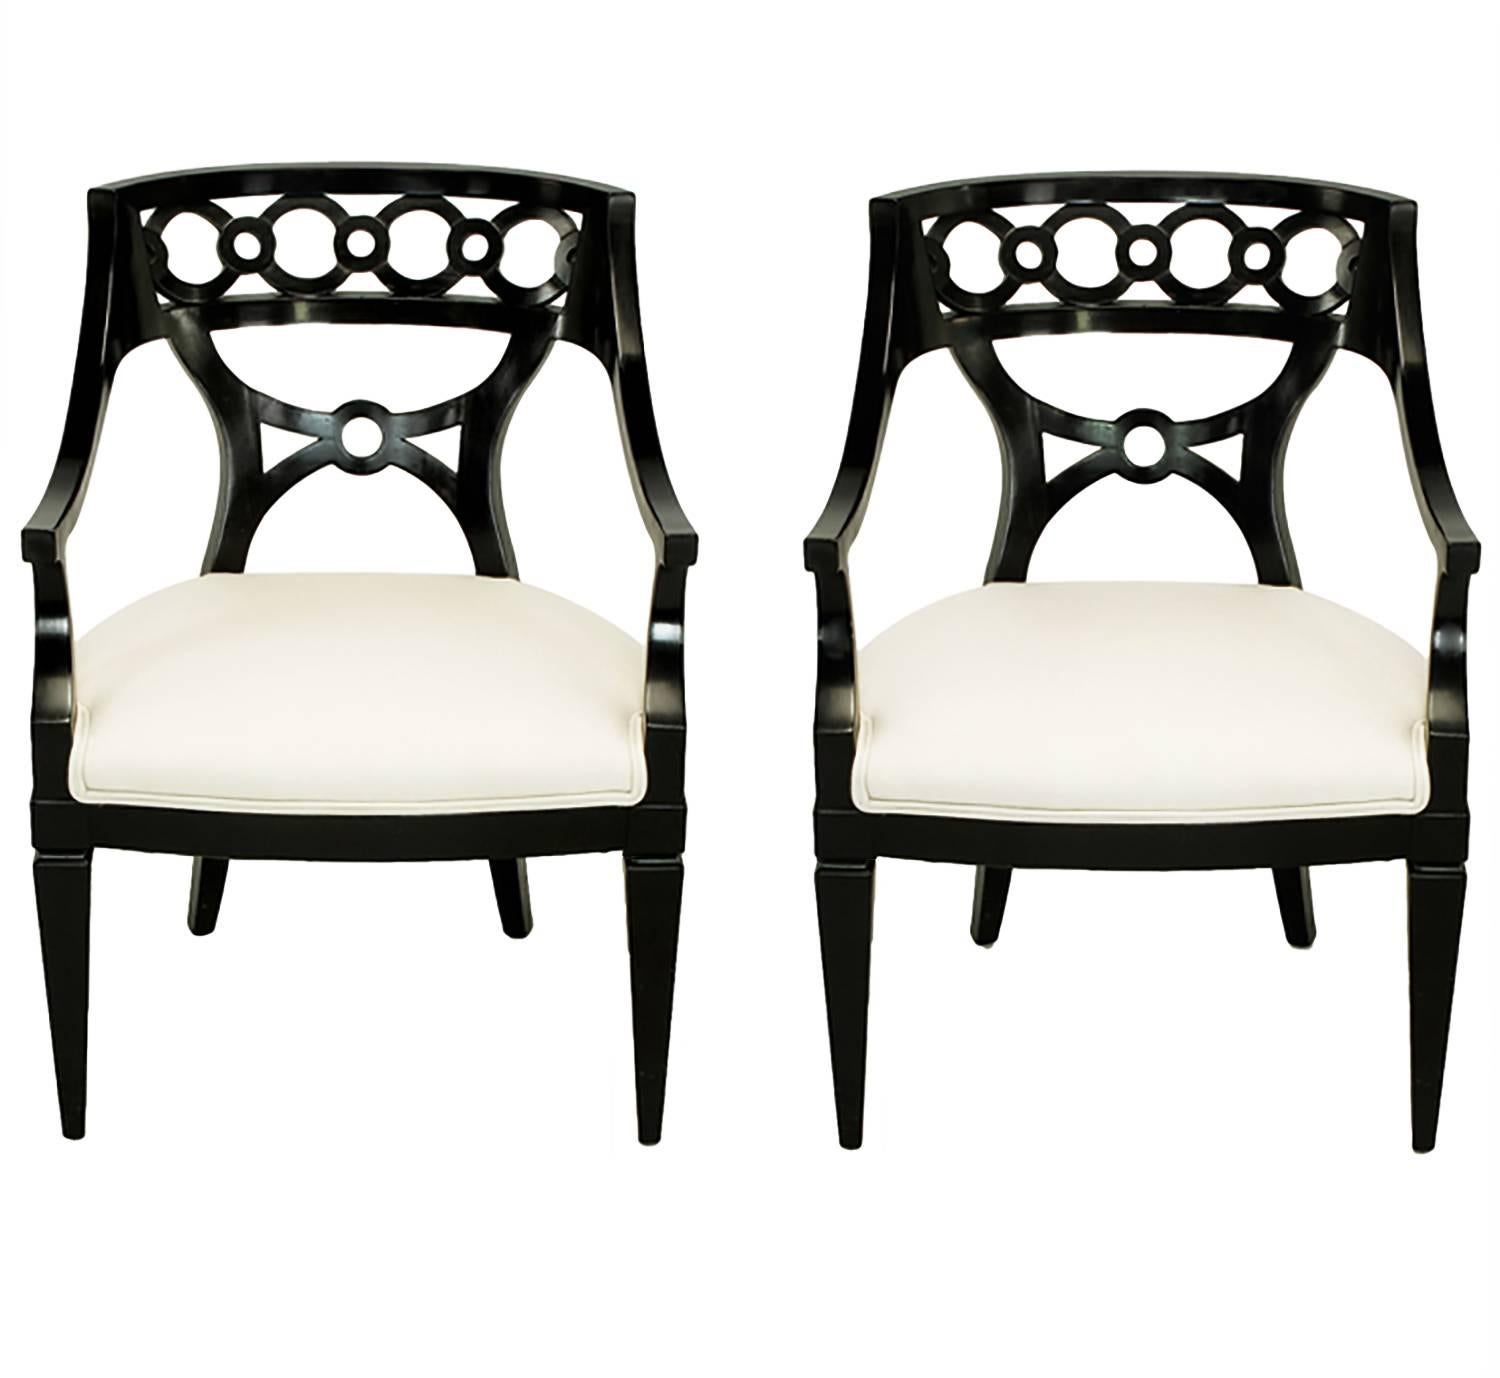 Pair of Black Lacquer and Wool Armchairs with Interlocking Rings For Sale